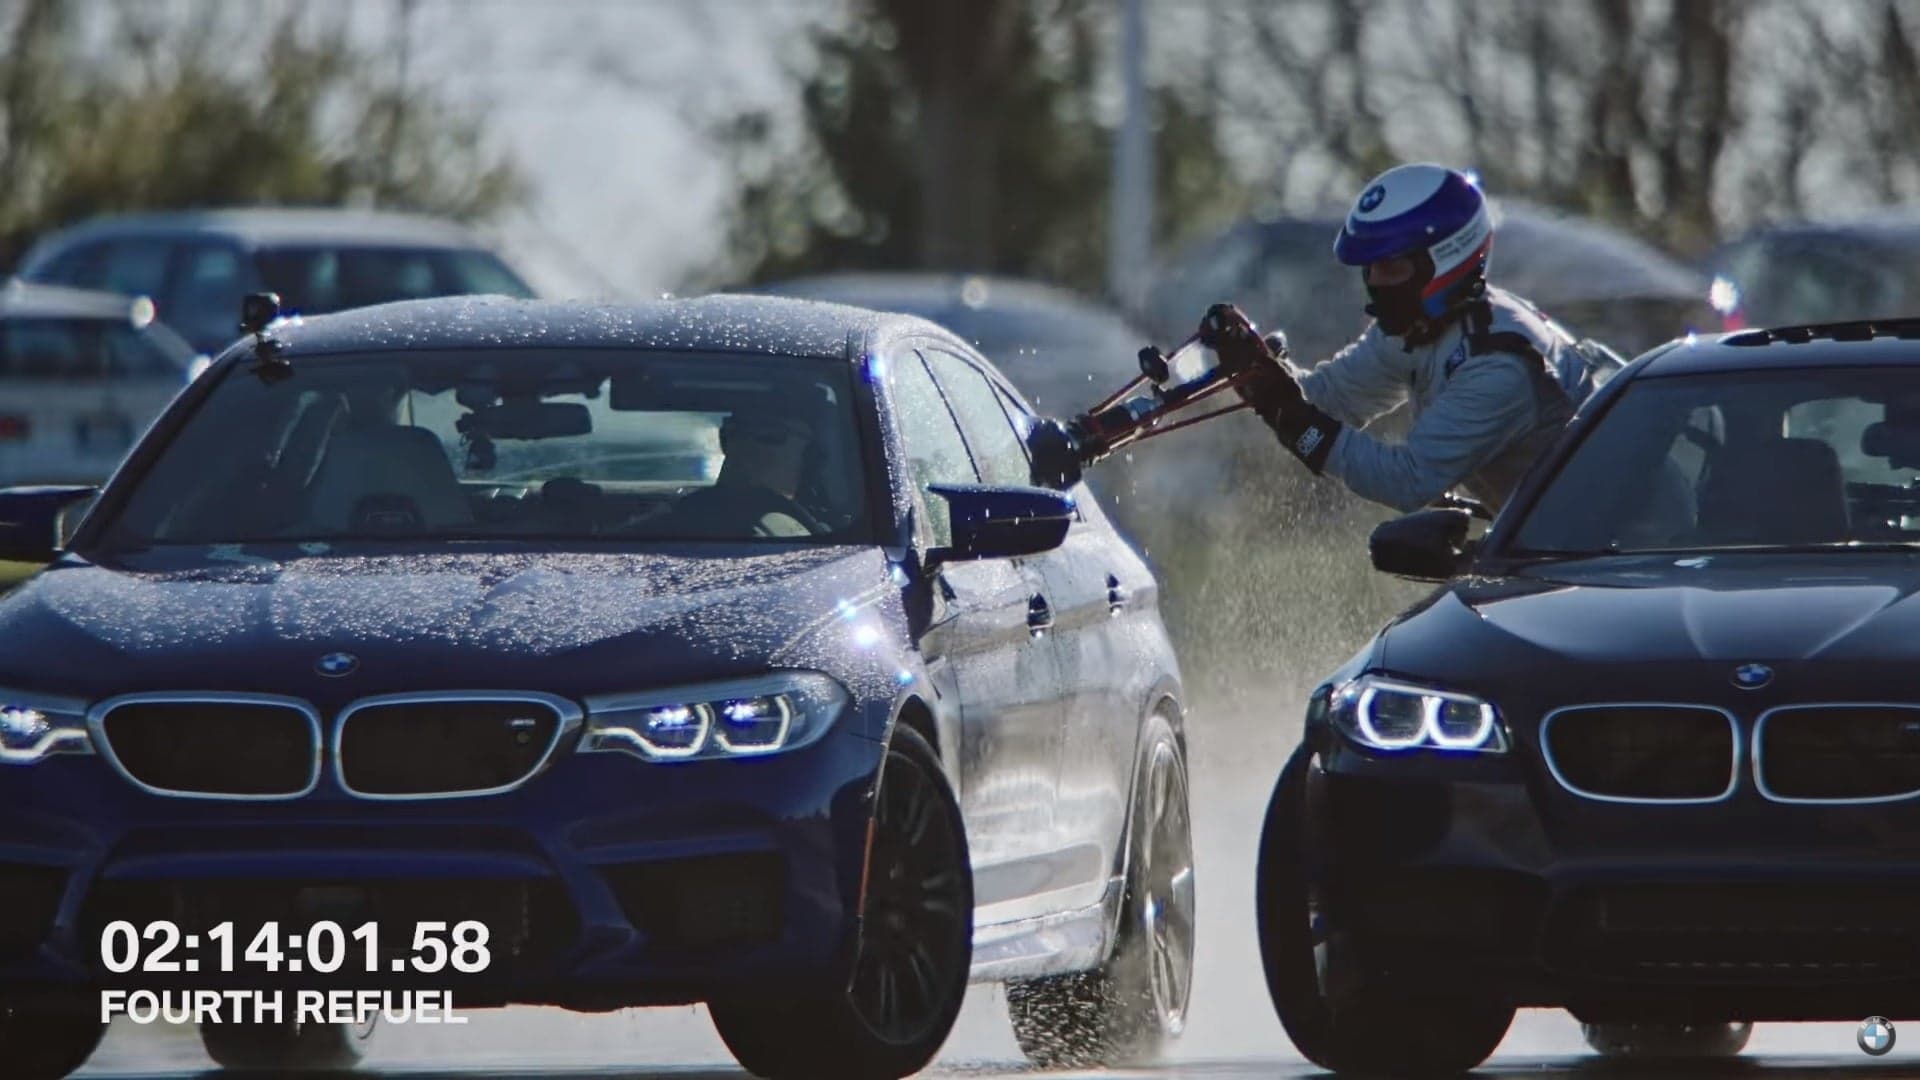 New 2018 BMW M5 Claims World Record for Longest Drift with 232.5-Mile Slide